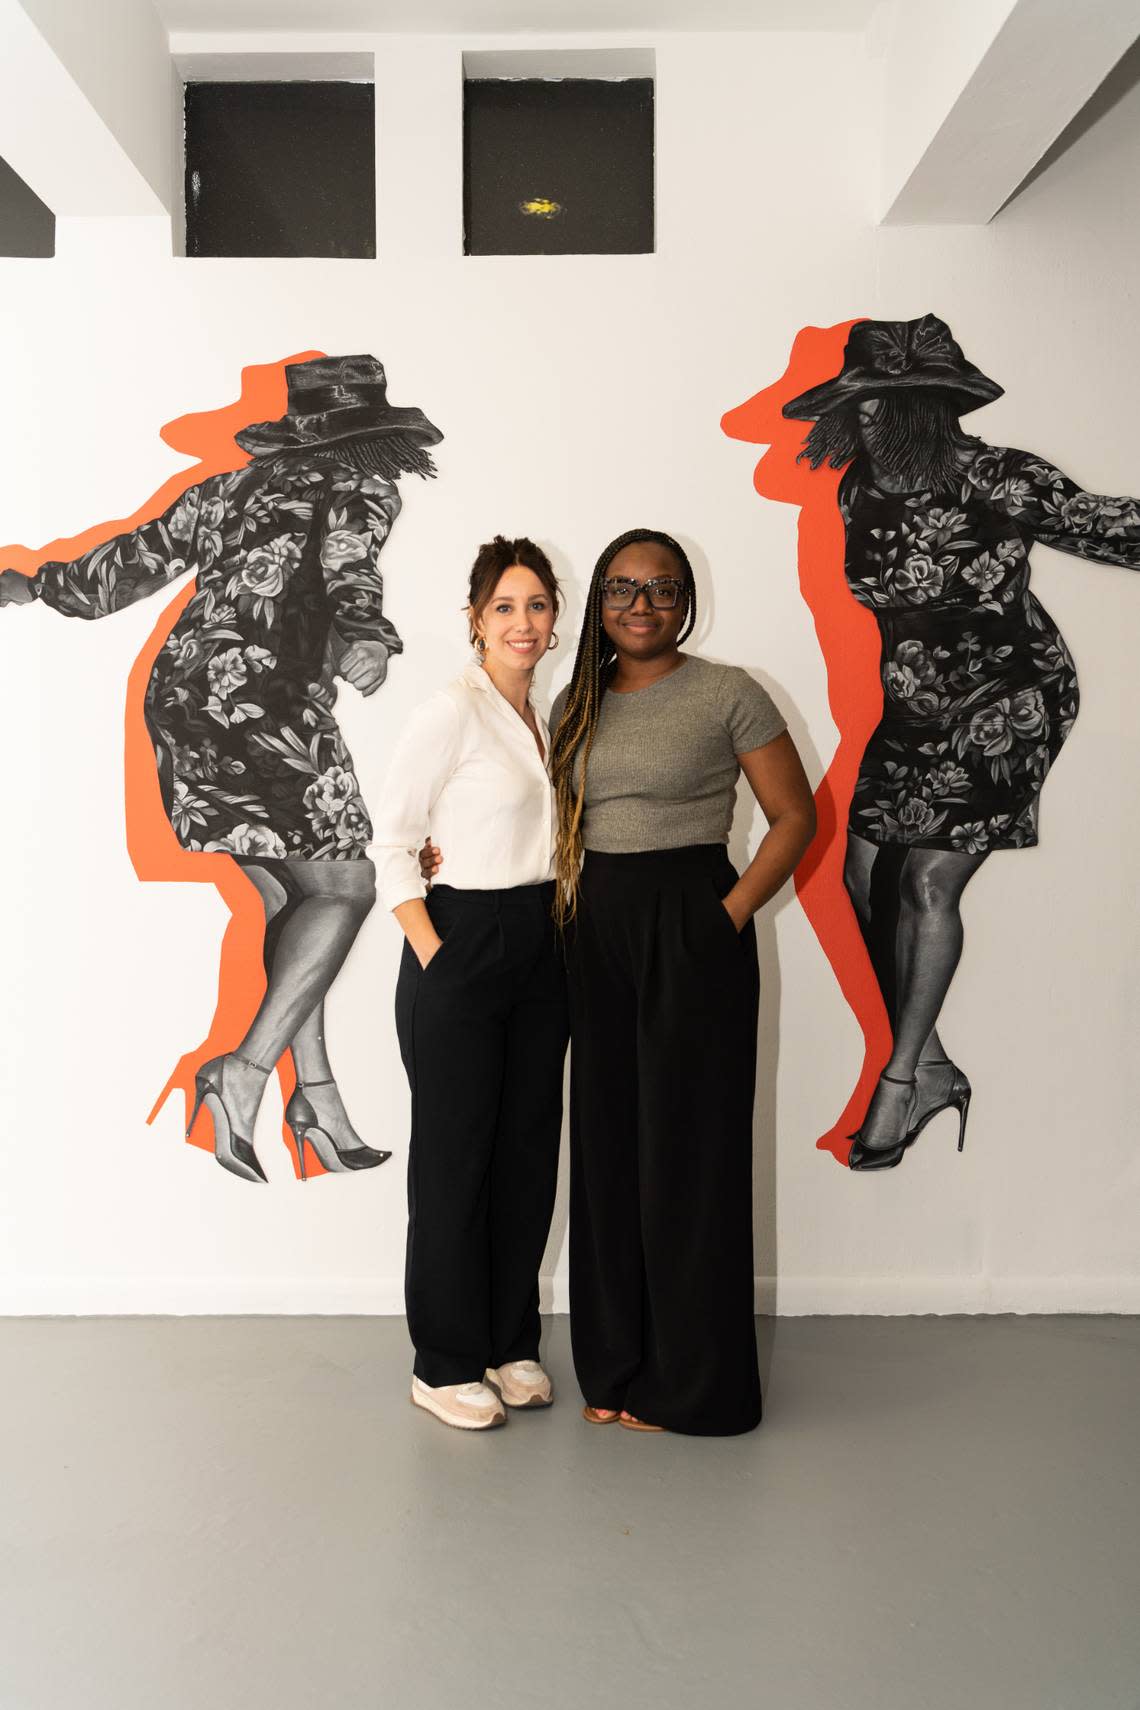 Curator Laura Novoa, left, and artist Chris Friday, right, at ‘Good Times,’ an exhibition of Friday’s new artwork on display at Oolite Arts on Lincoln Road.